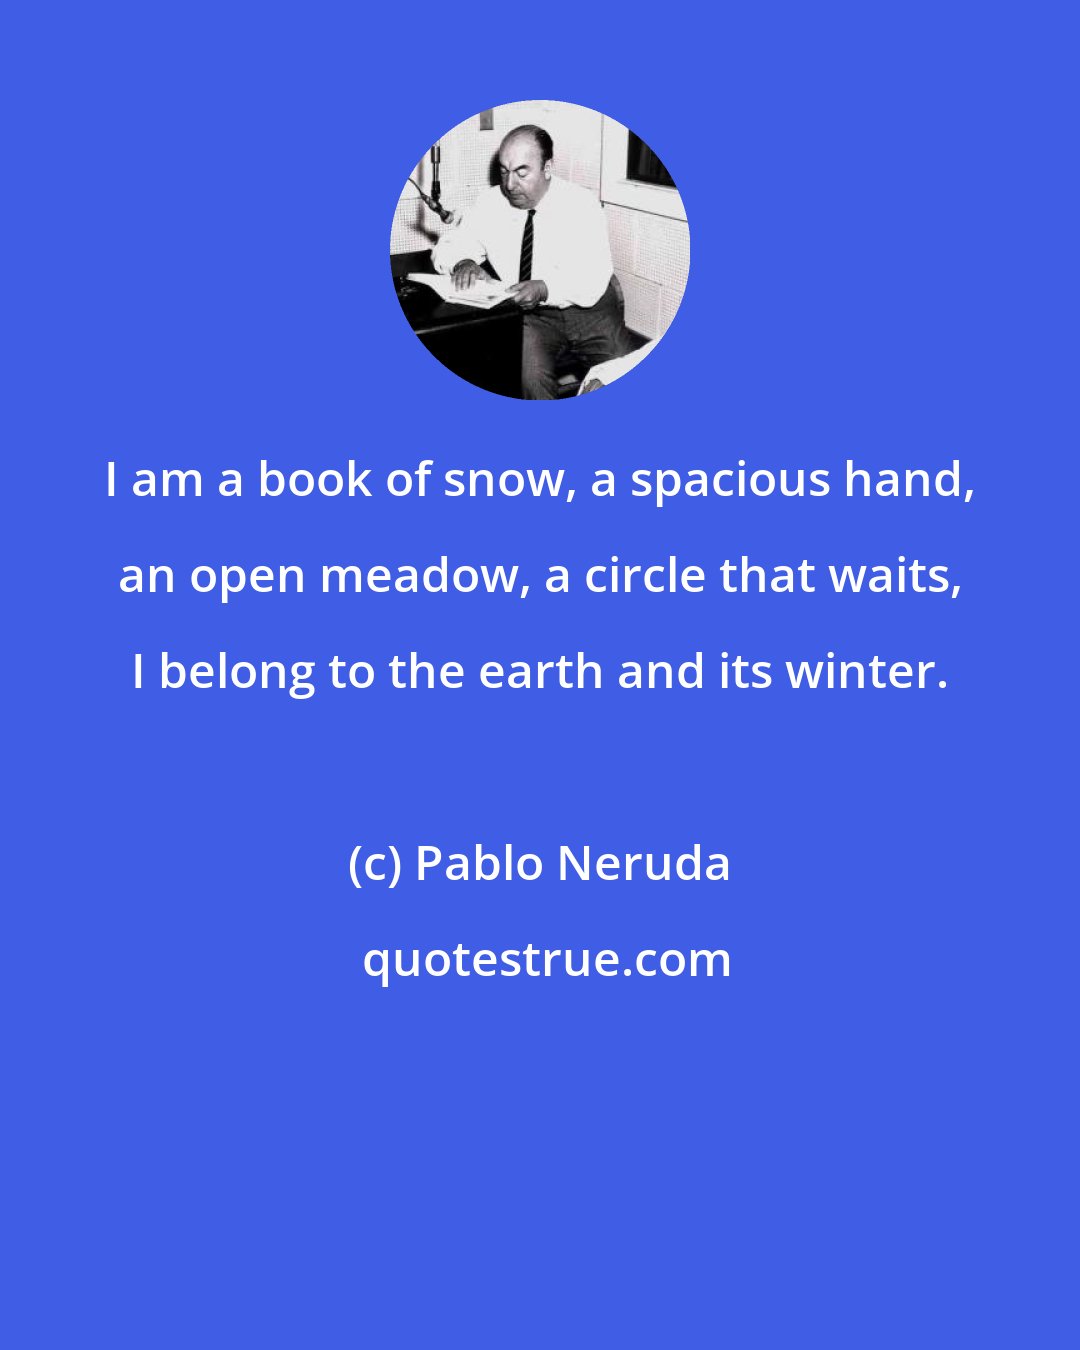 Pablo Neruda: I am a book of snow, a spacious hand, an open meadow, a circle that waits, I belong to the earth and its winter.